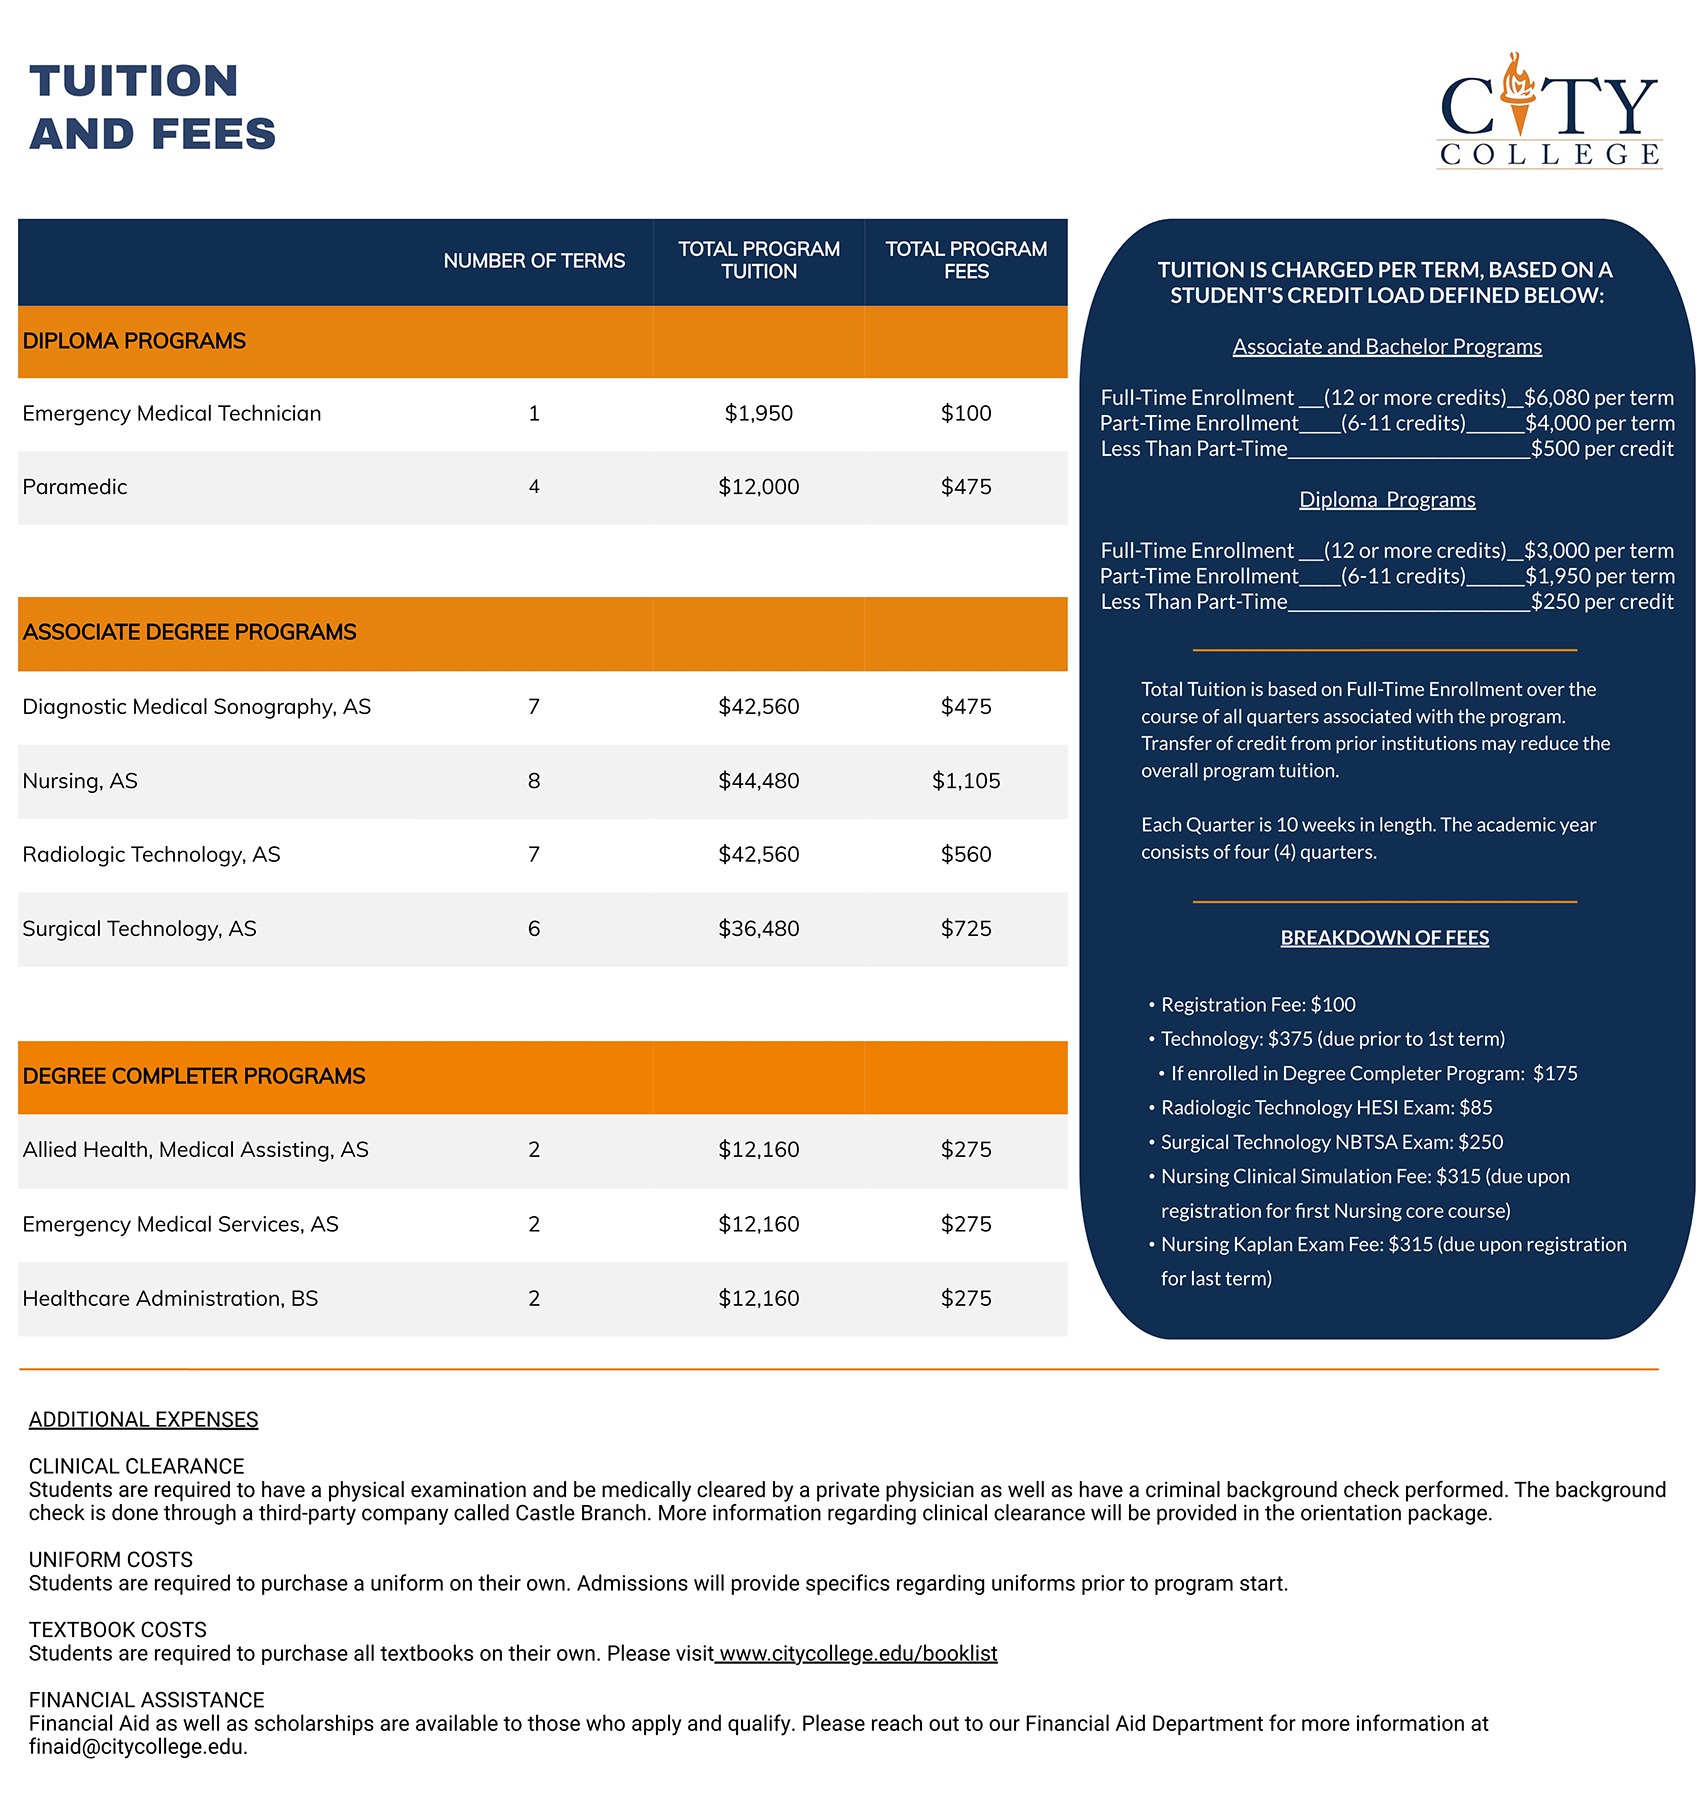 City College tuition for each program, broken down by how many terms and price per term. Includes breakdown of additional fees for exams, uniforms, etc.